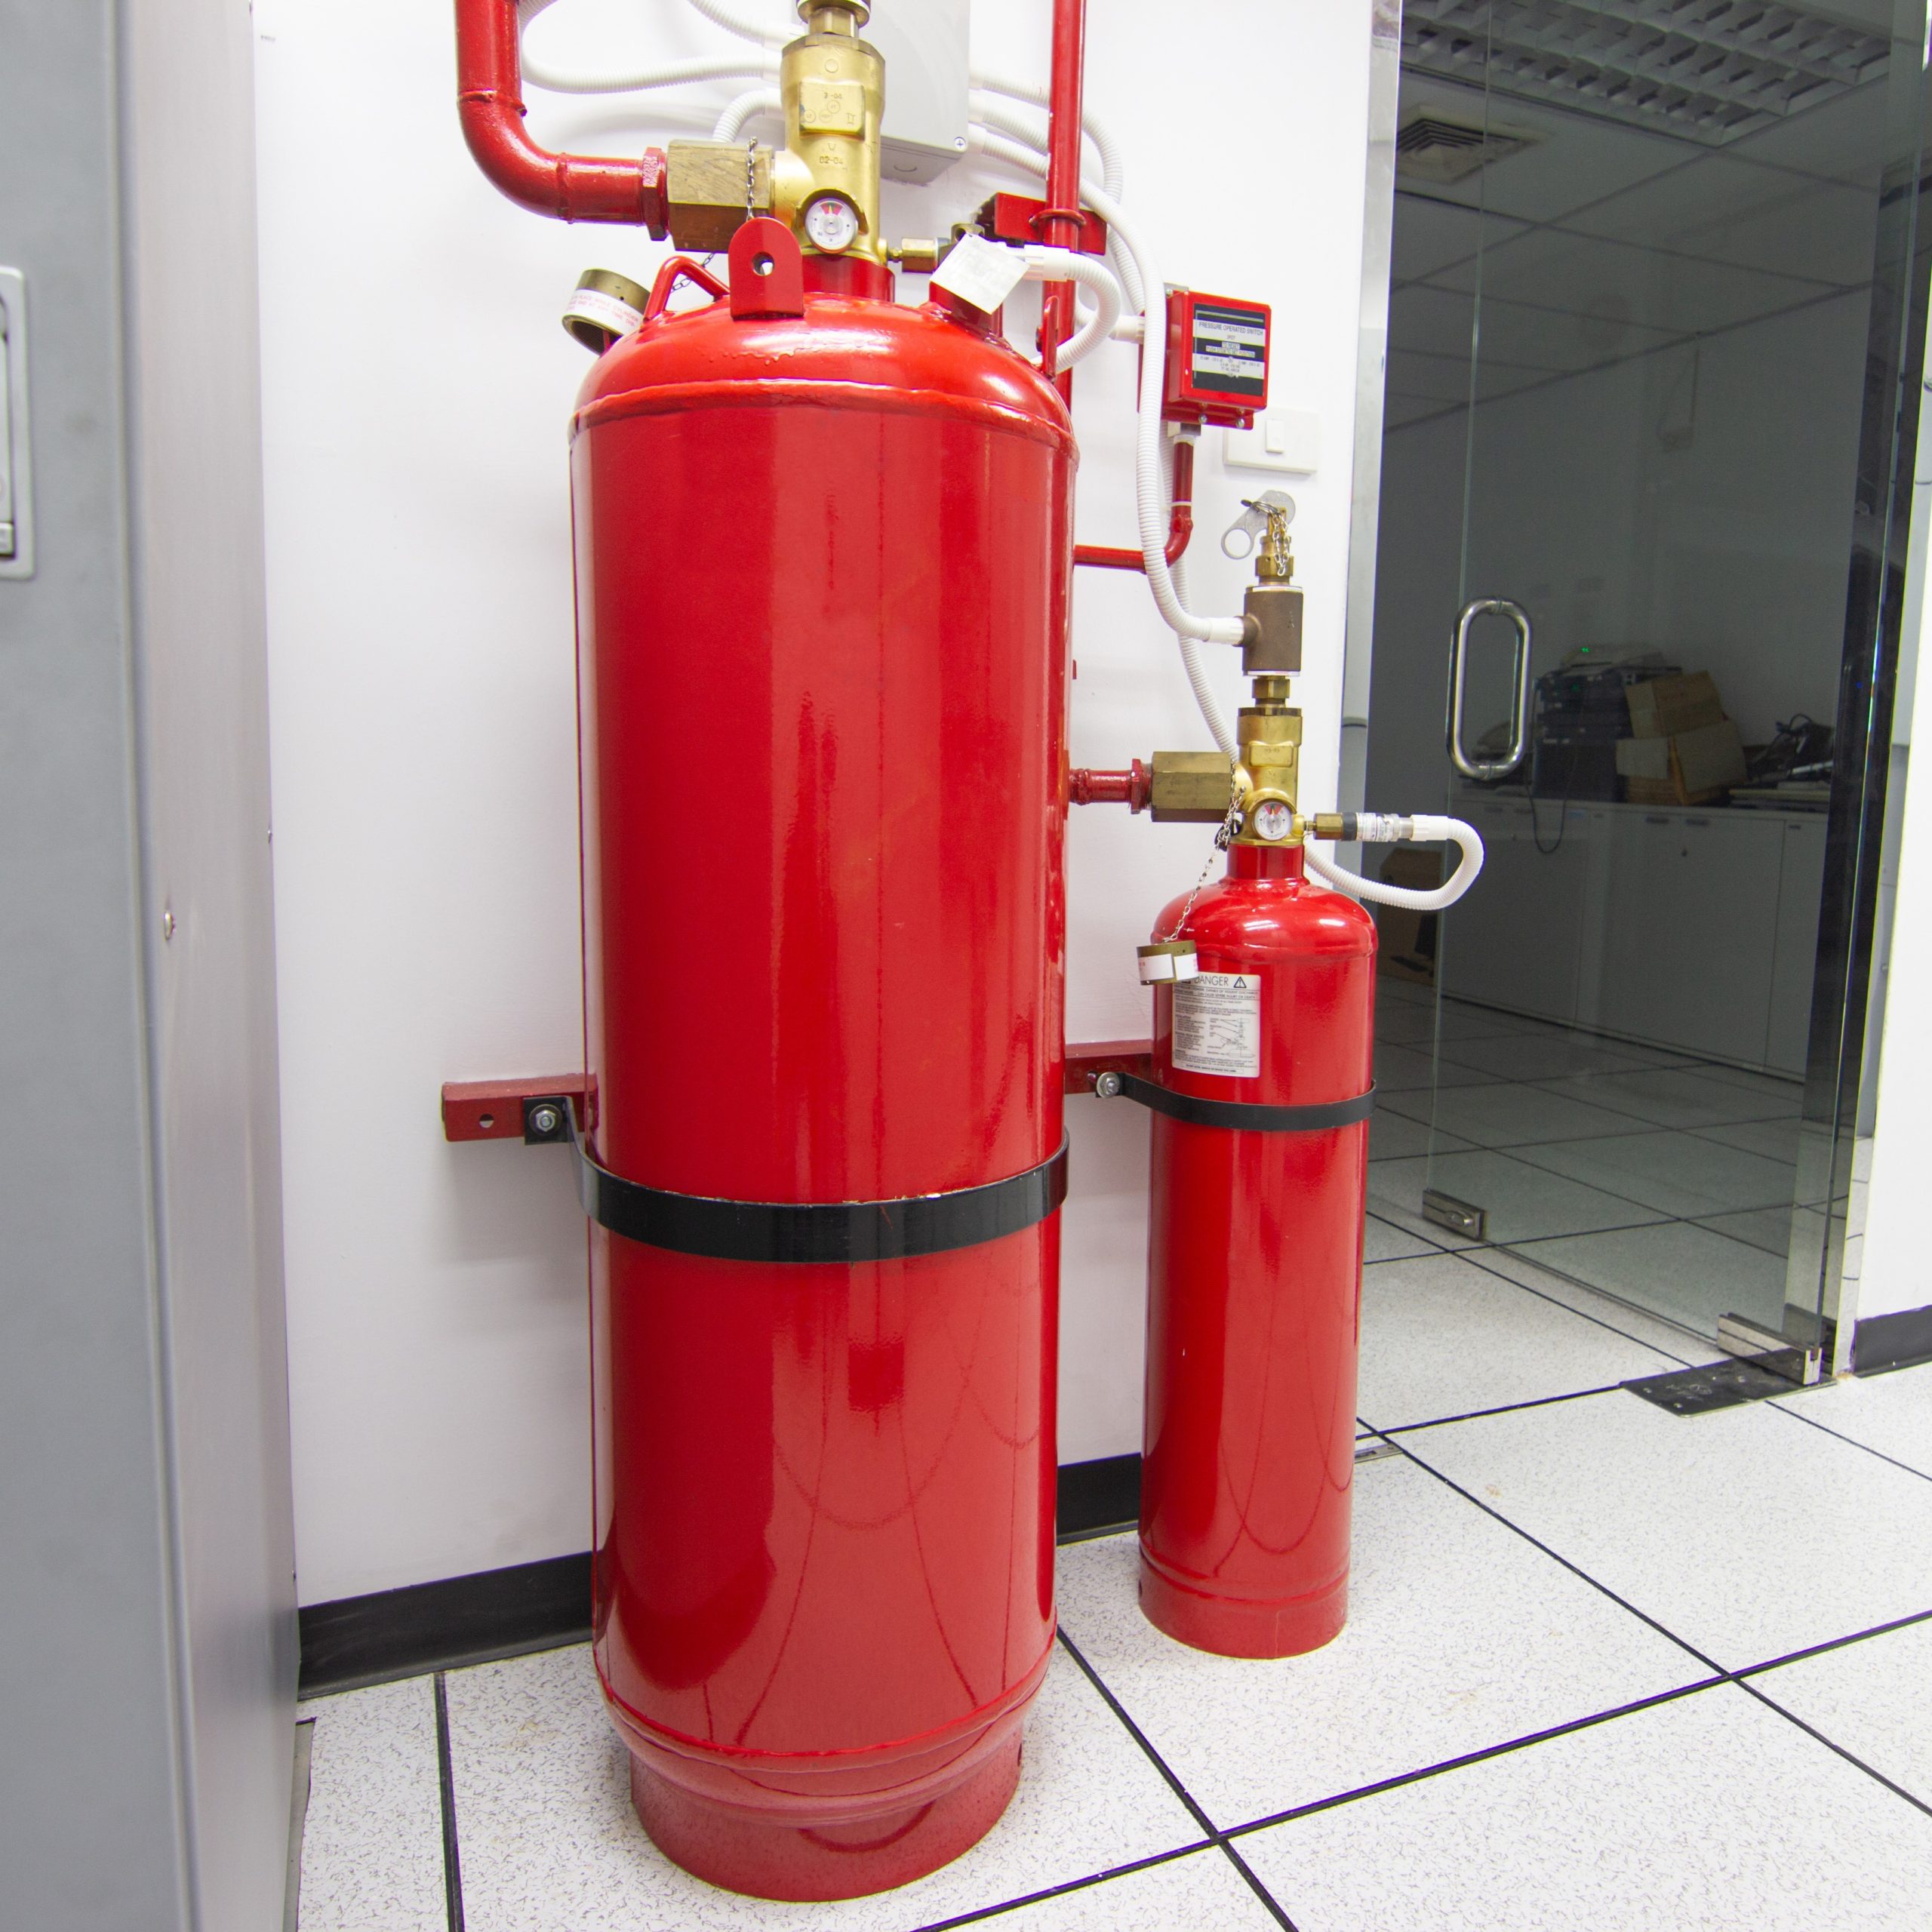 Alternative Agents for Fire Suppression Systems